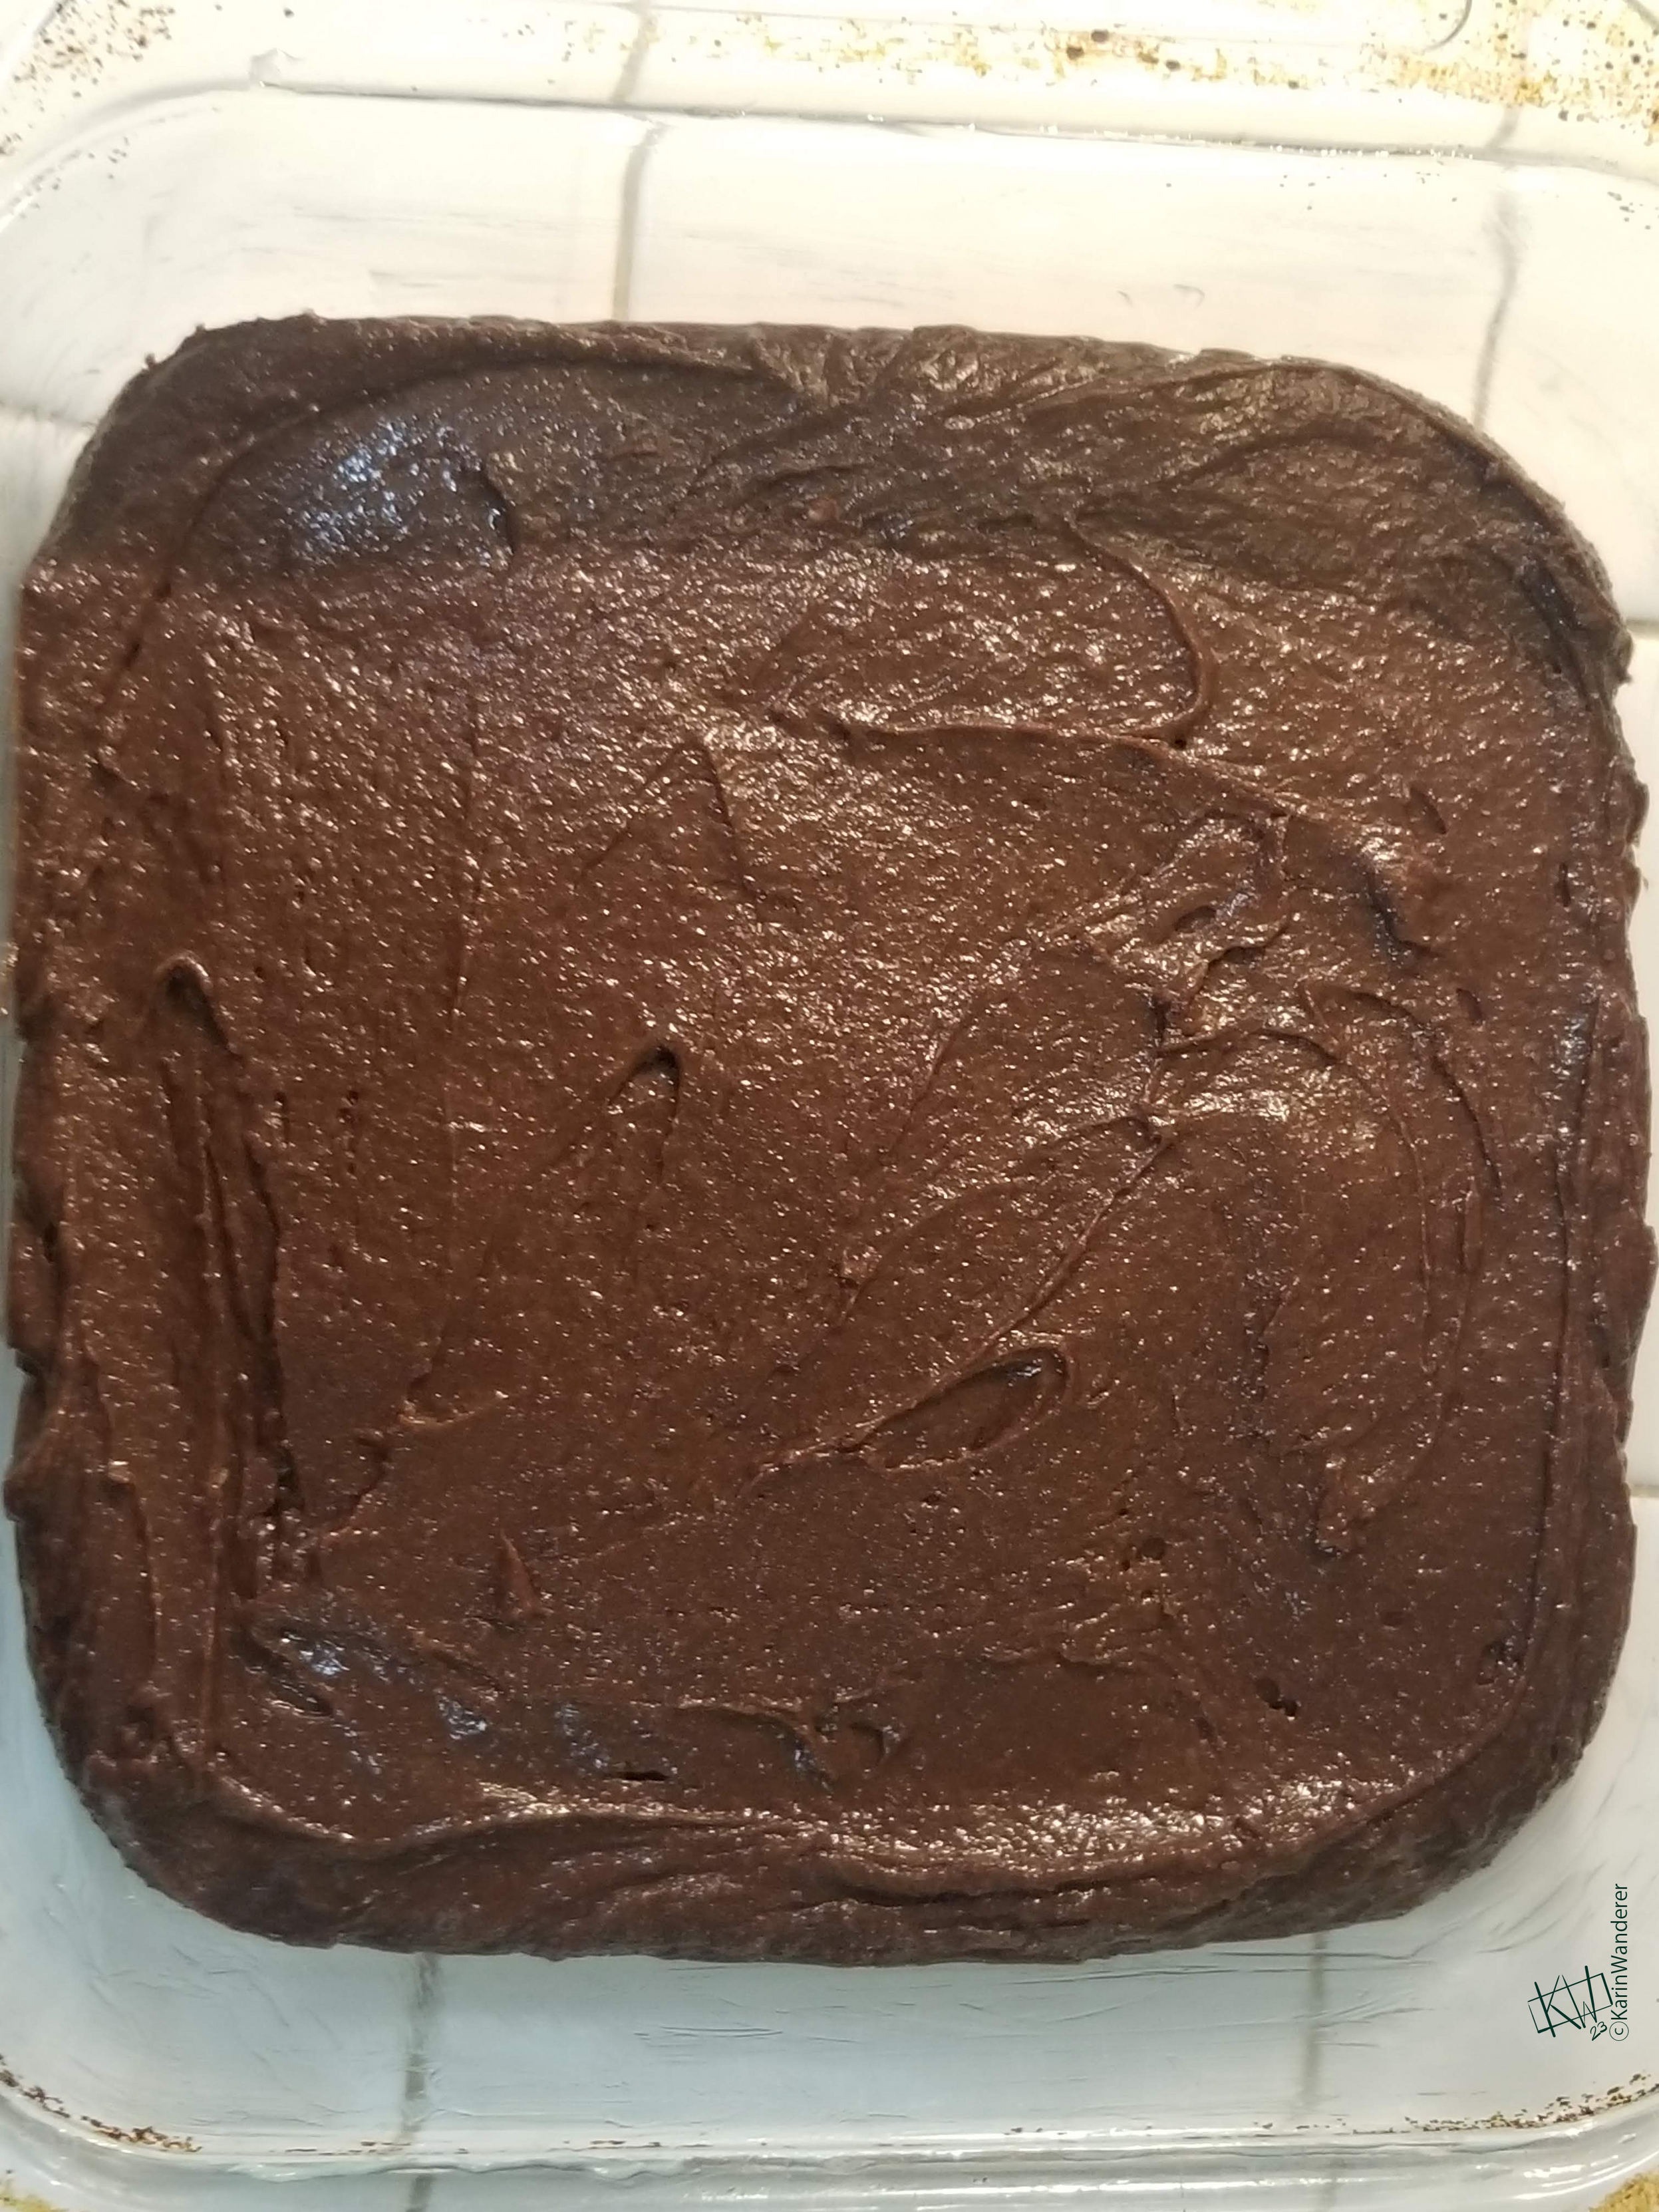 Photo of brownie batter in a square glass baking dish.